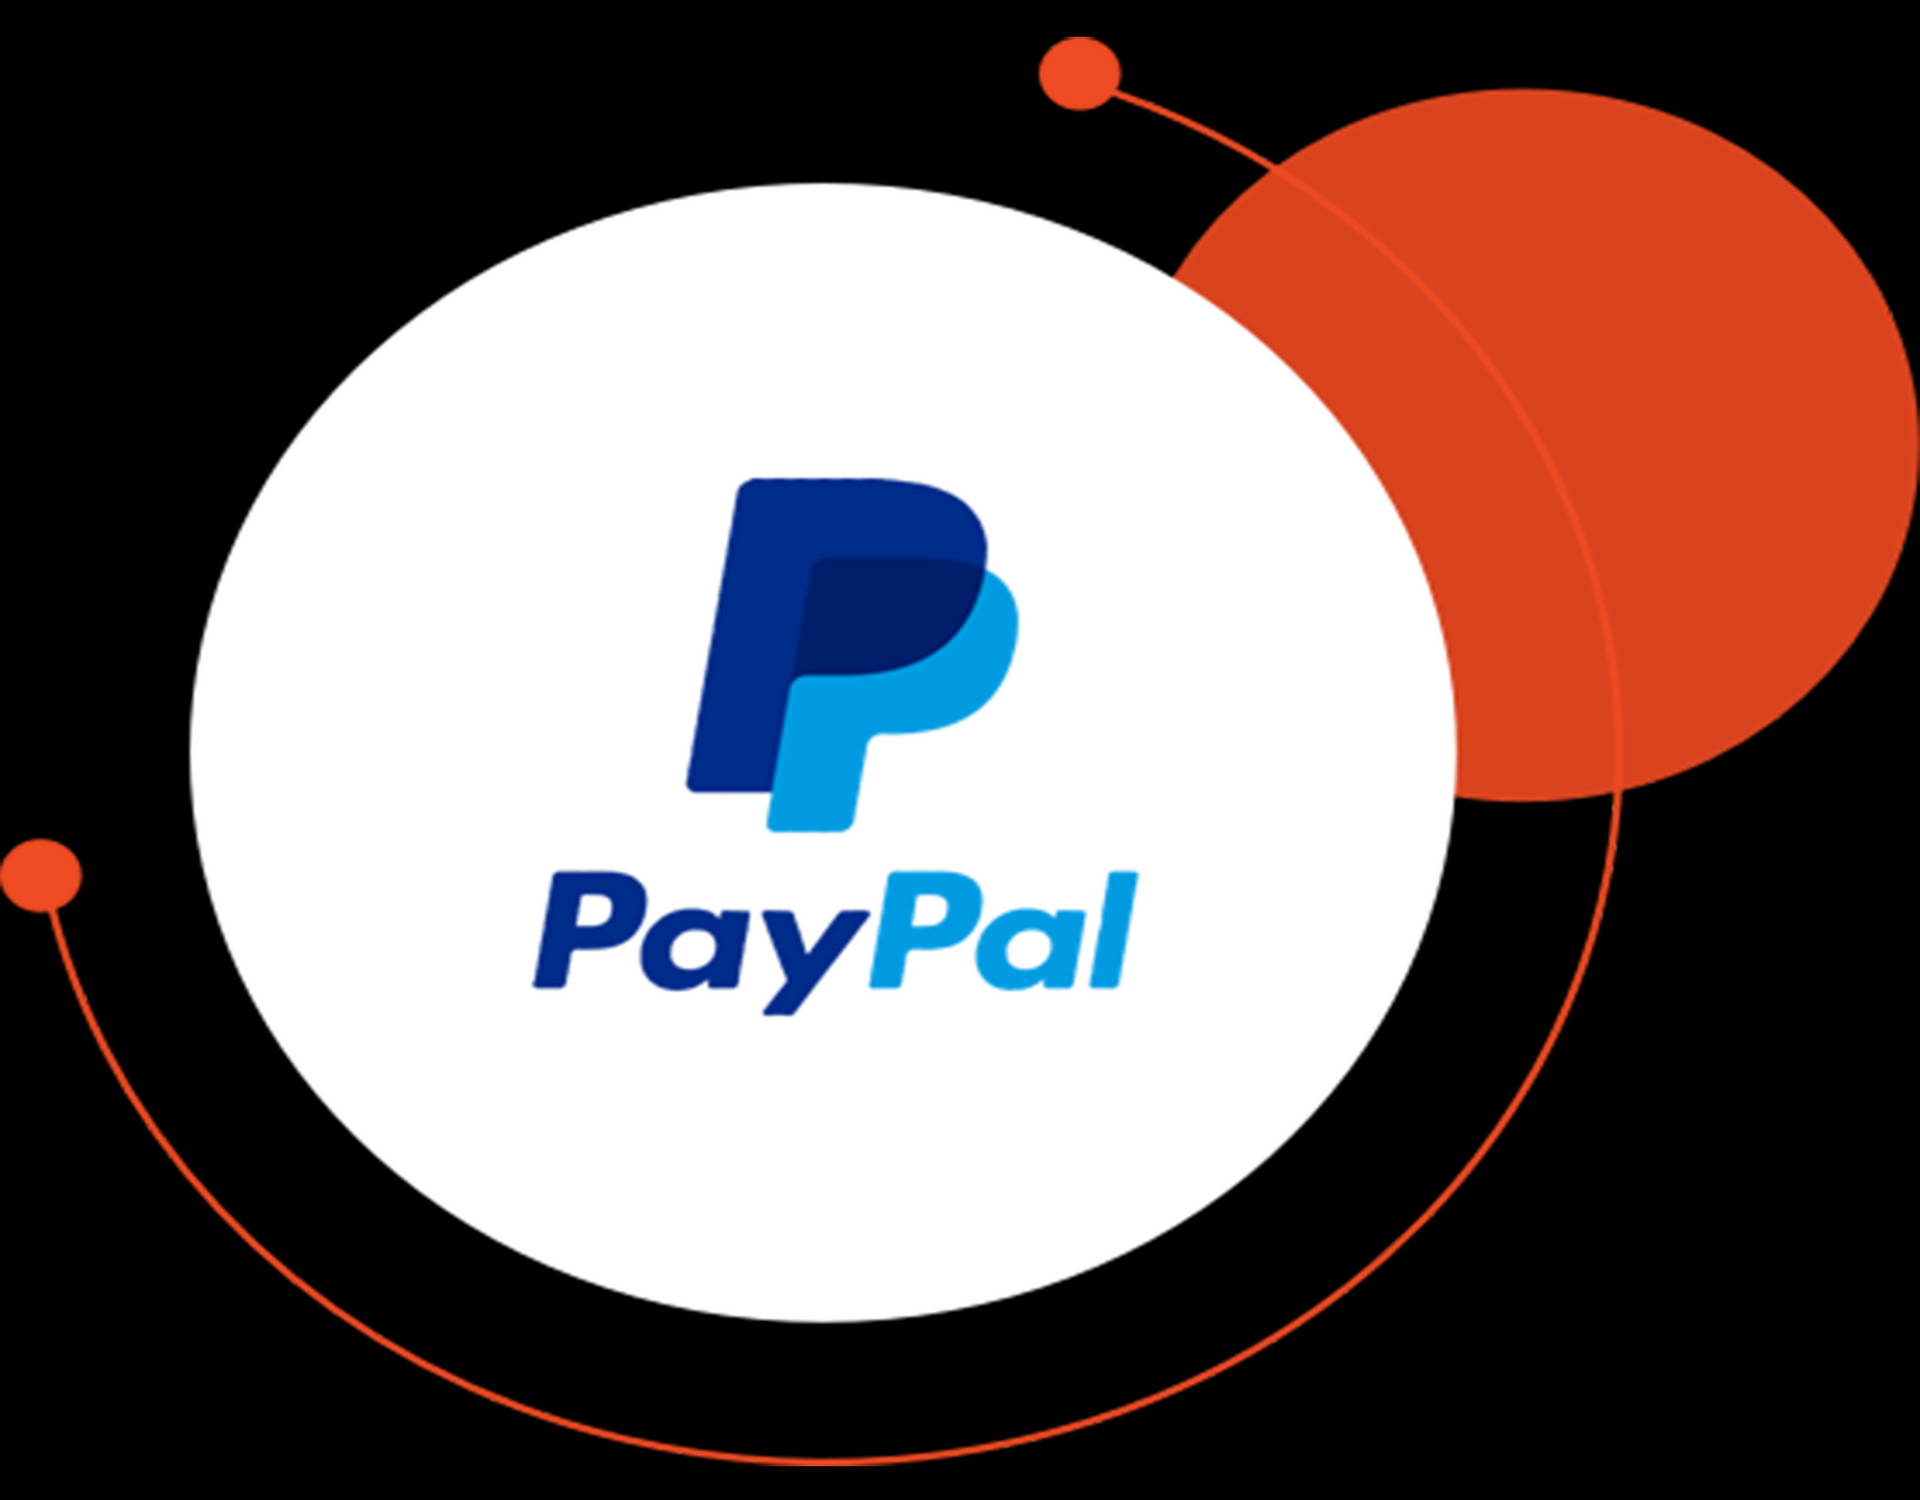 Paypal Circles Design Background